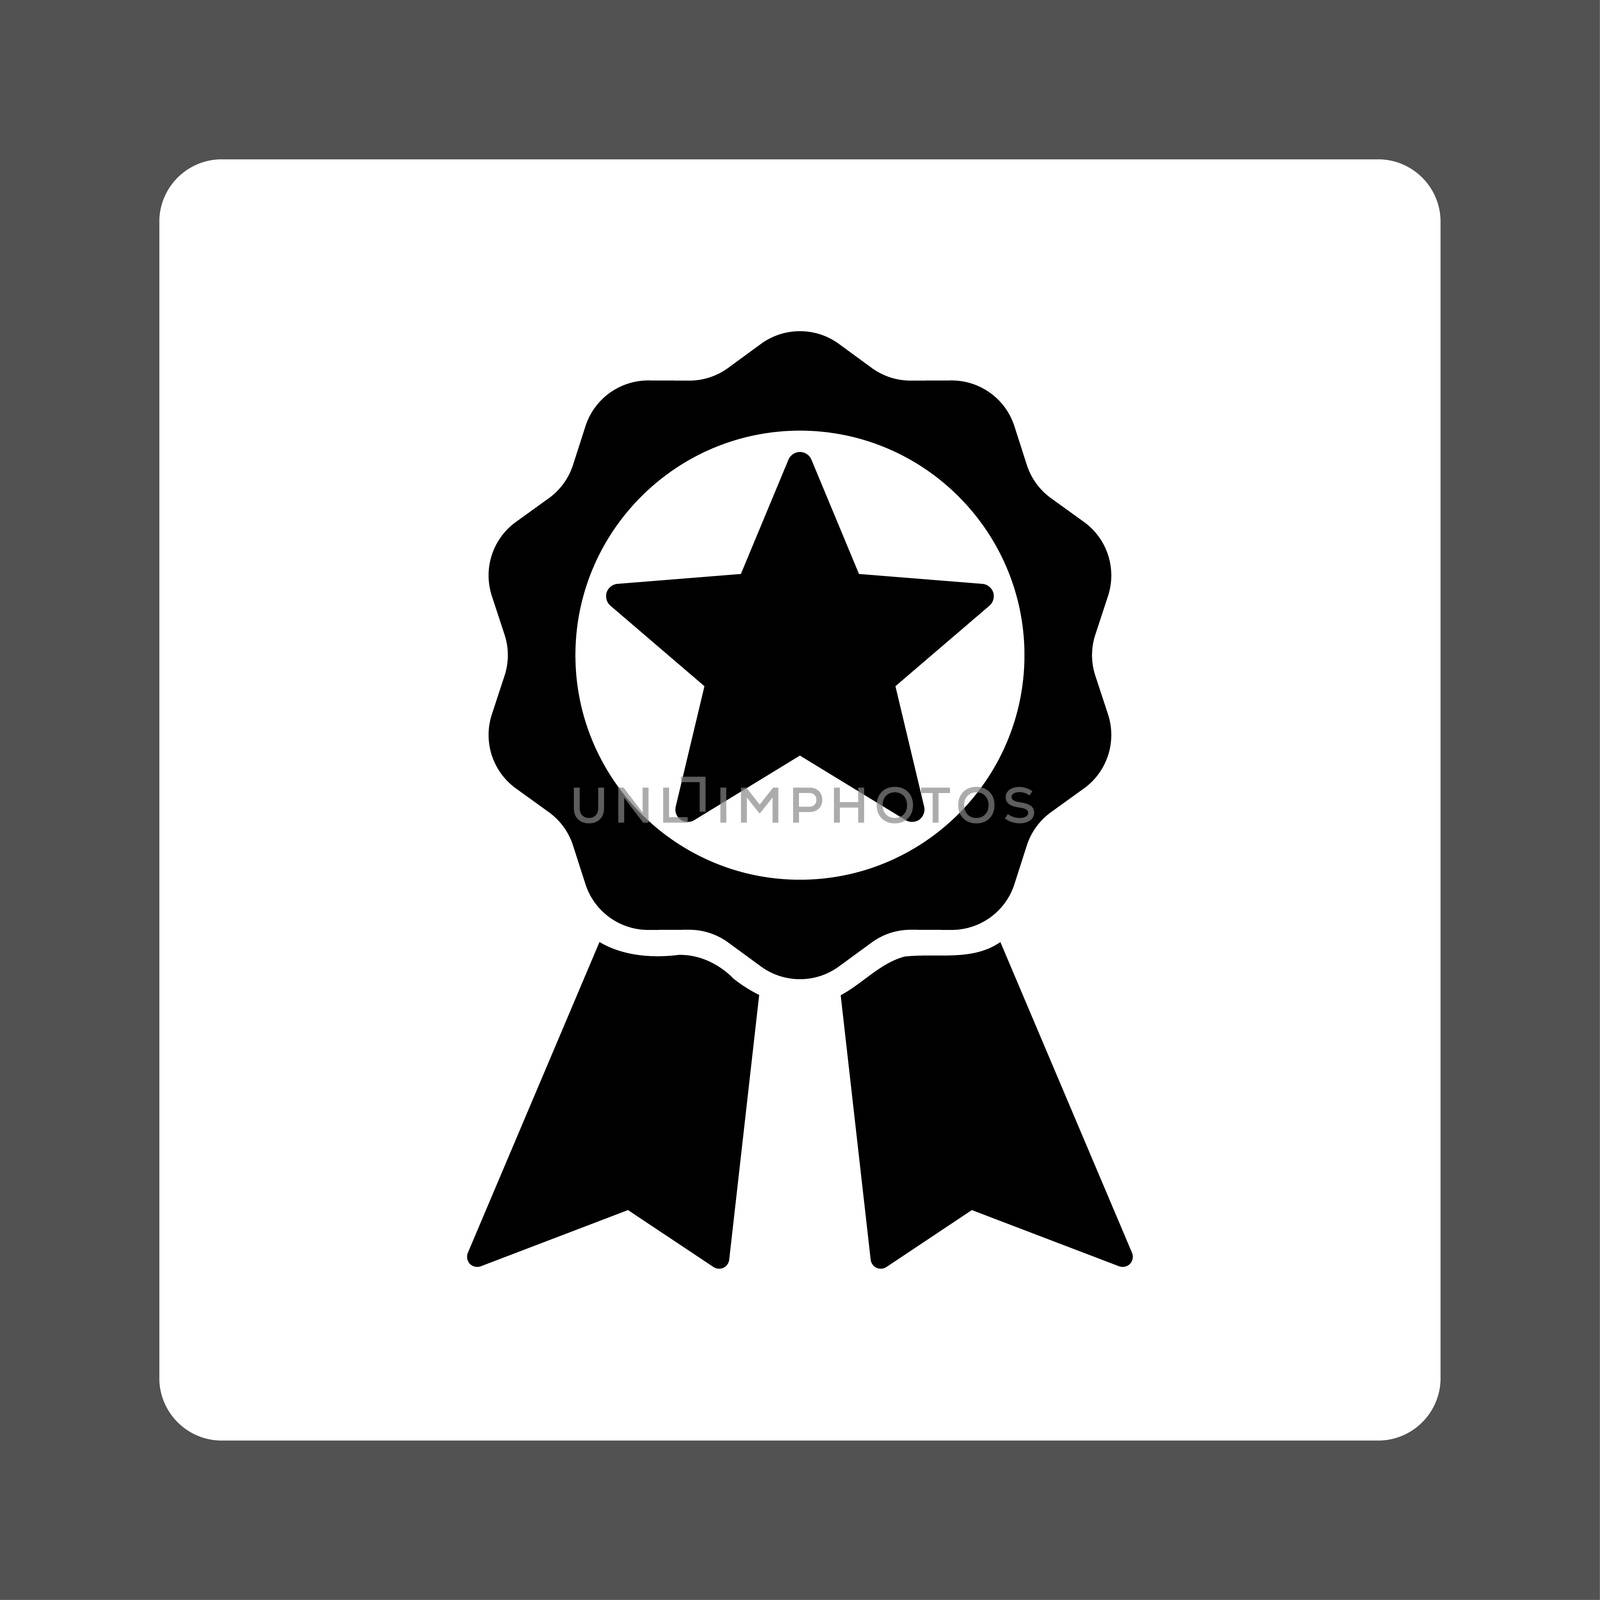 Award icon from Award Buttons OverColor Set. Icon style is black and white colors, flat rounded square button, gray background.